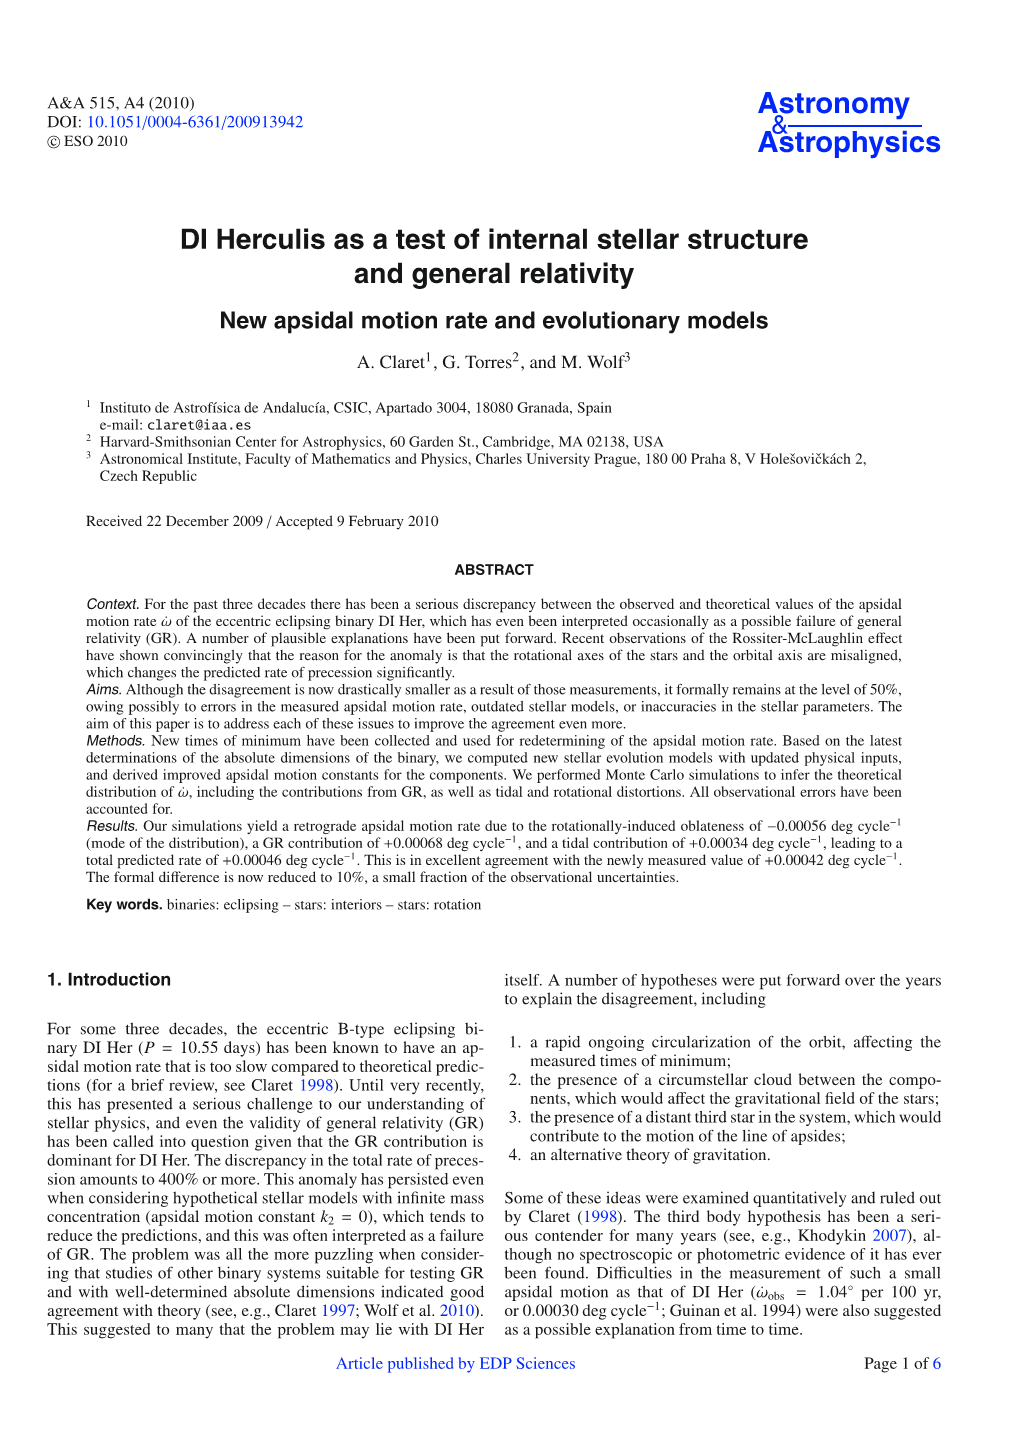 DI Herculis As a Test of Internal Stellar Structure and General Relativity New Apsidal Motion Rate and Evolutionary Models